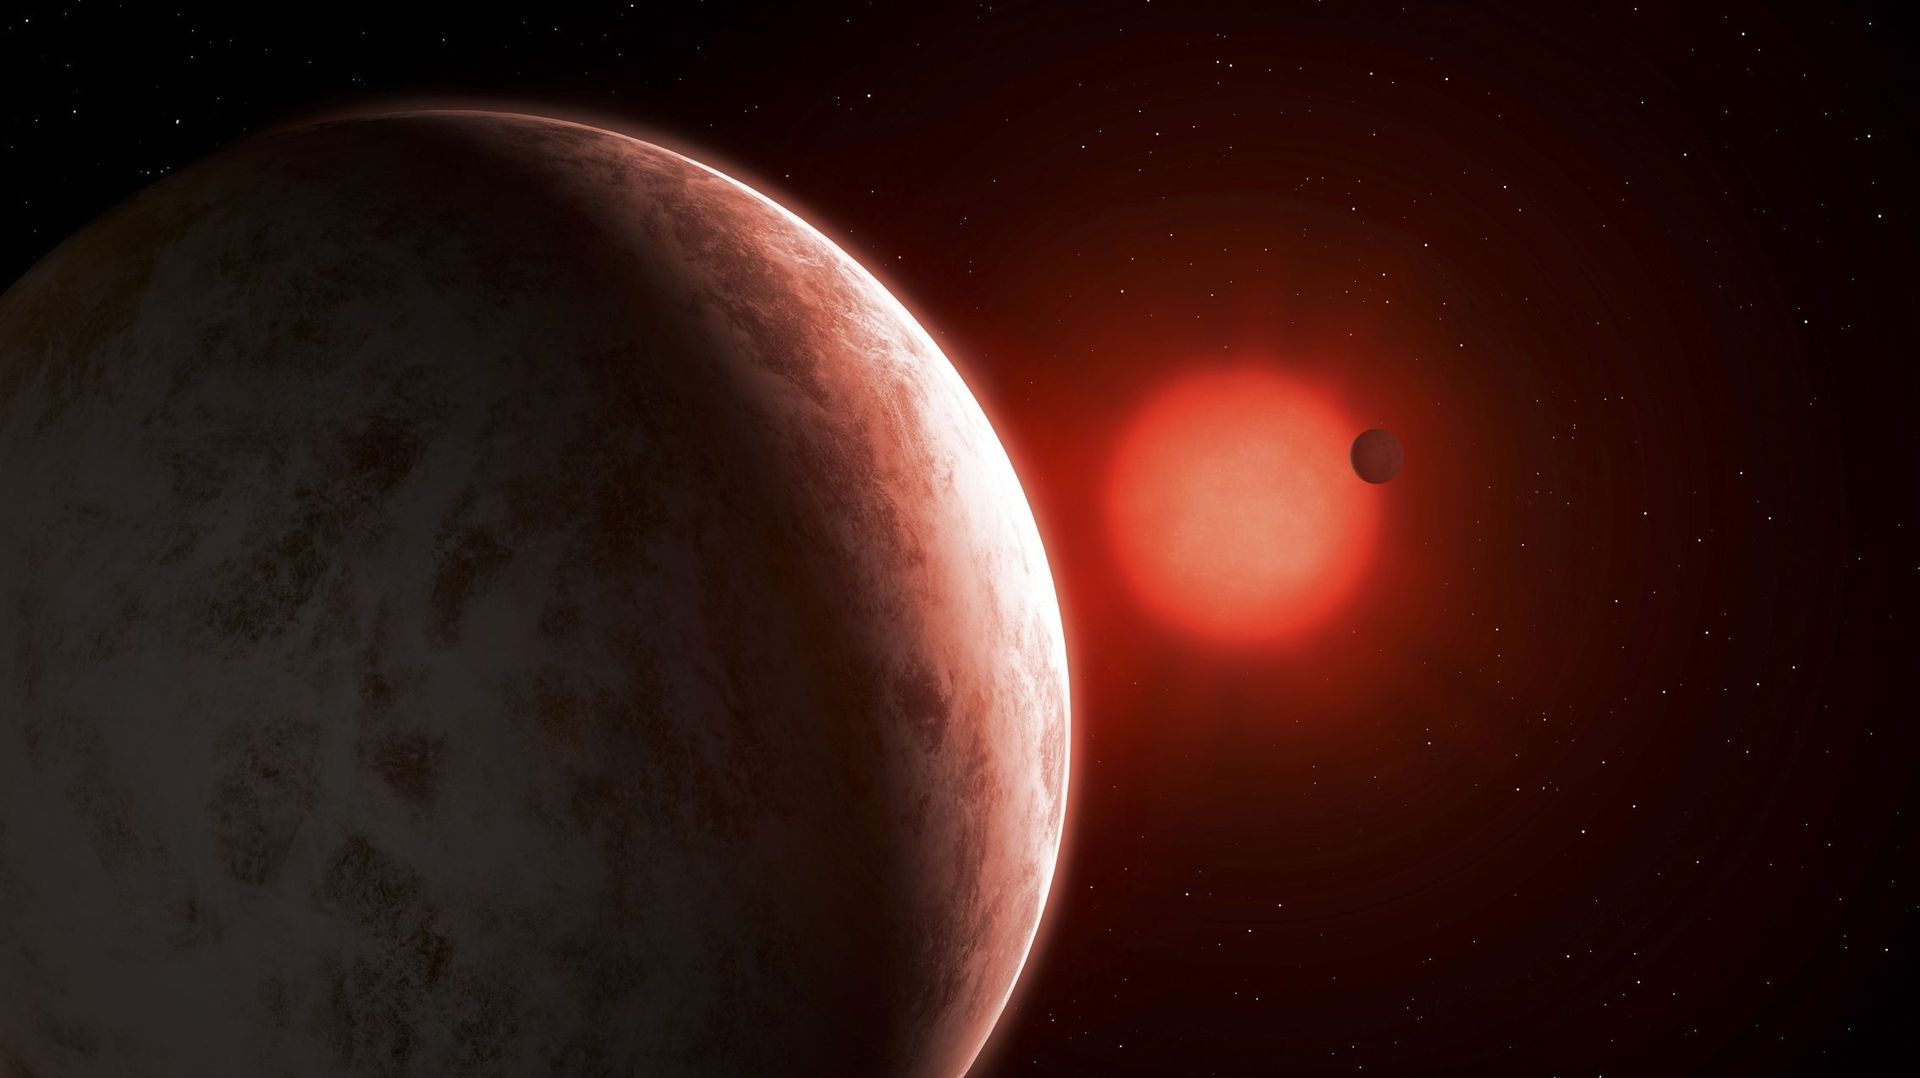 Scientists have detected a repeating radio signal from an exoplanet